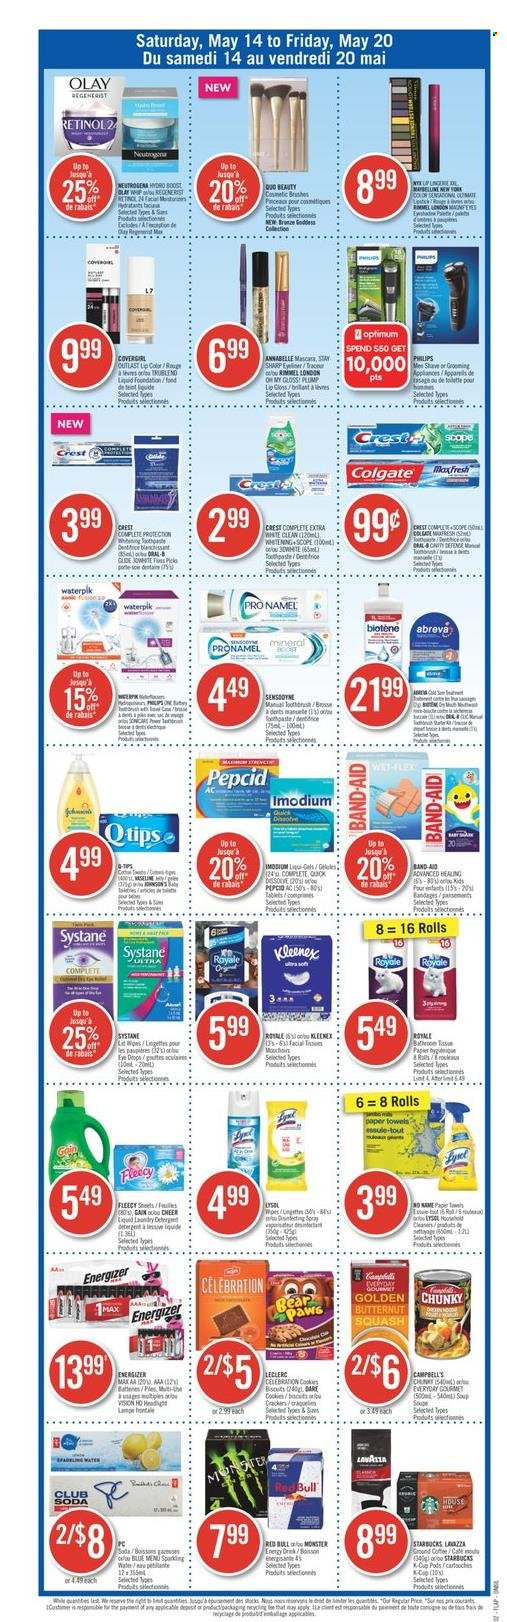 thumbnail - Shoppers Drug Mart Flyer - May 14, 2022 - May 20, 2022 - Sales products - Philips, Celebration, soup, Campbell's, Monster, Red Bull, Monster Energy, Club Soda, coffee, Starbucks, Kleenex, kitchen towels, paper towels, Gain, Biotene, toothpaste, Crest, Abreva, Olay, lip gloss, Vans, band-aid, Energizer, Colgate, Neutrogena, Systane, Imodium, Sensodyne. Page 15.